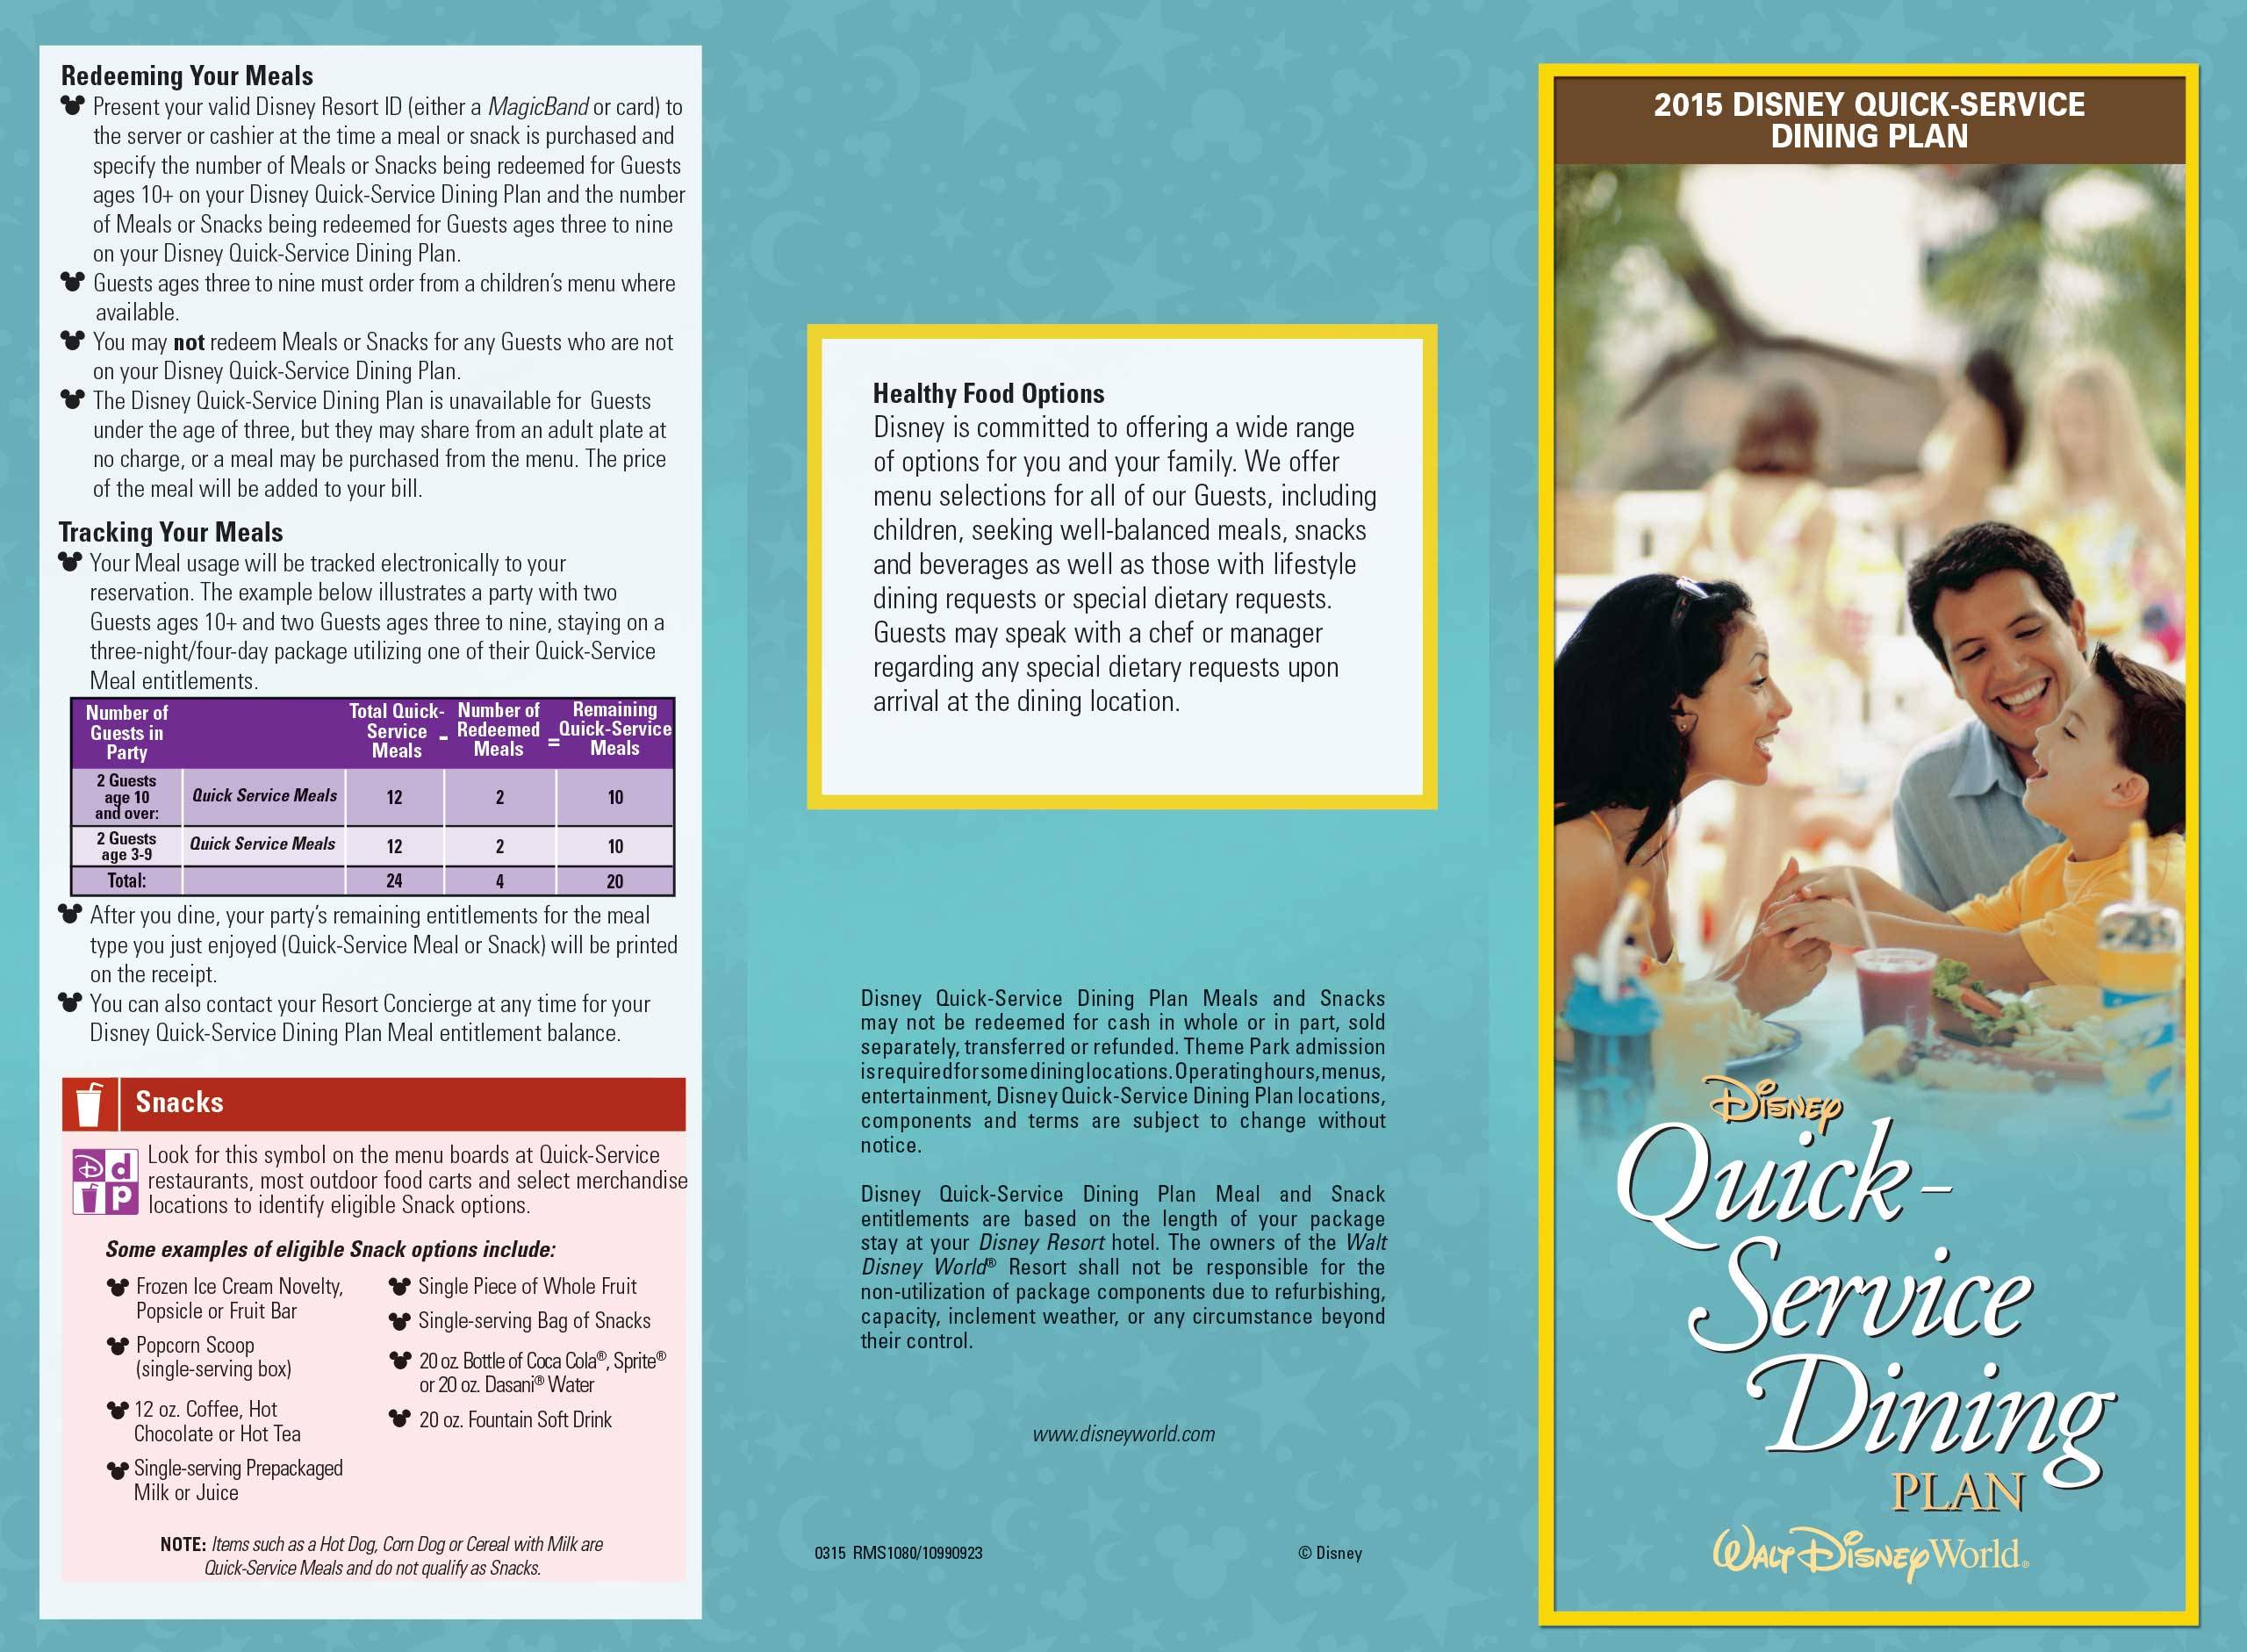 2015 Disney Quick Service Dining Plan brochure - Page 1